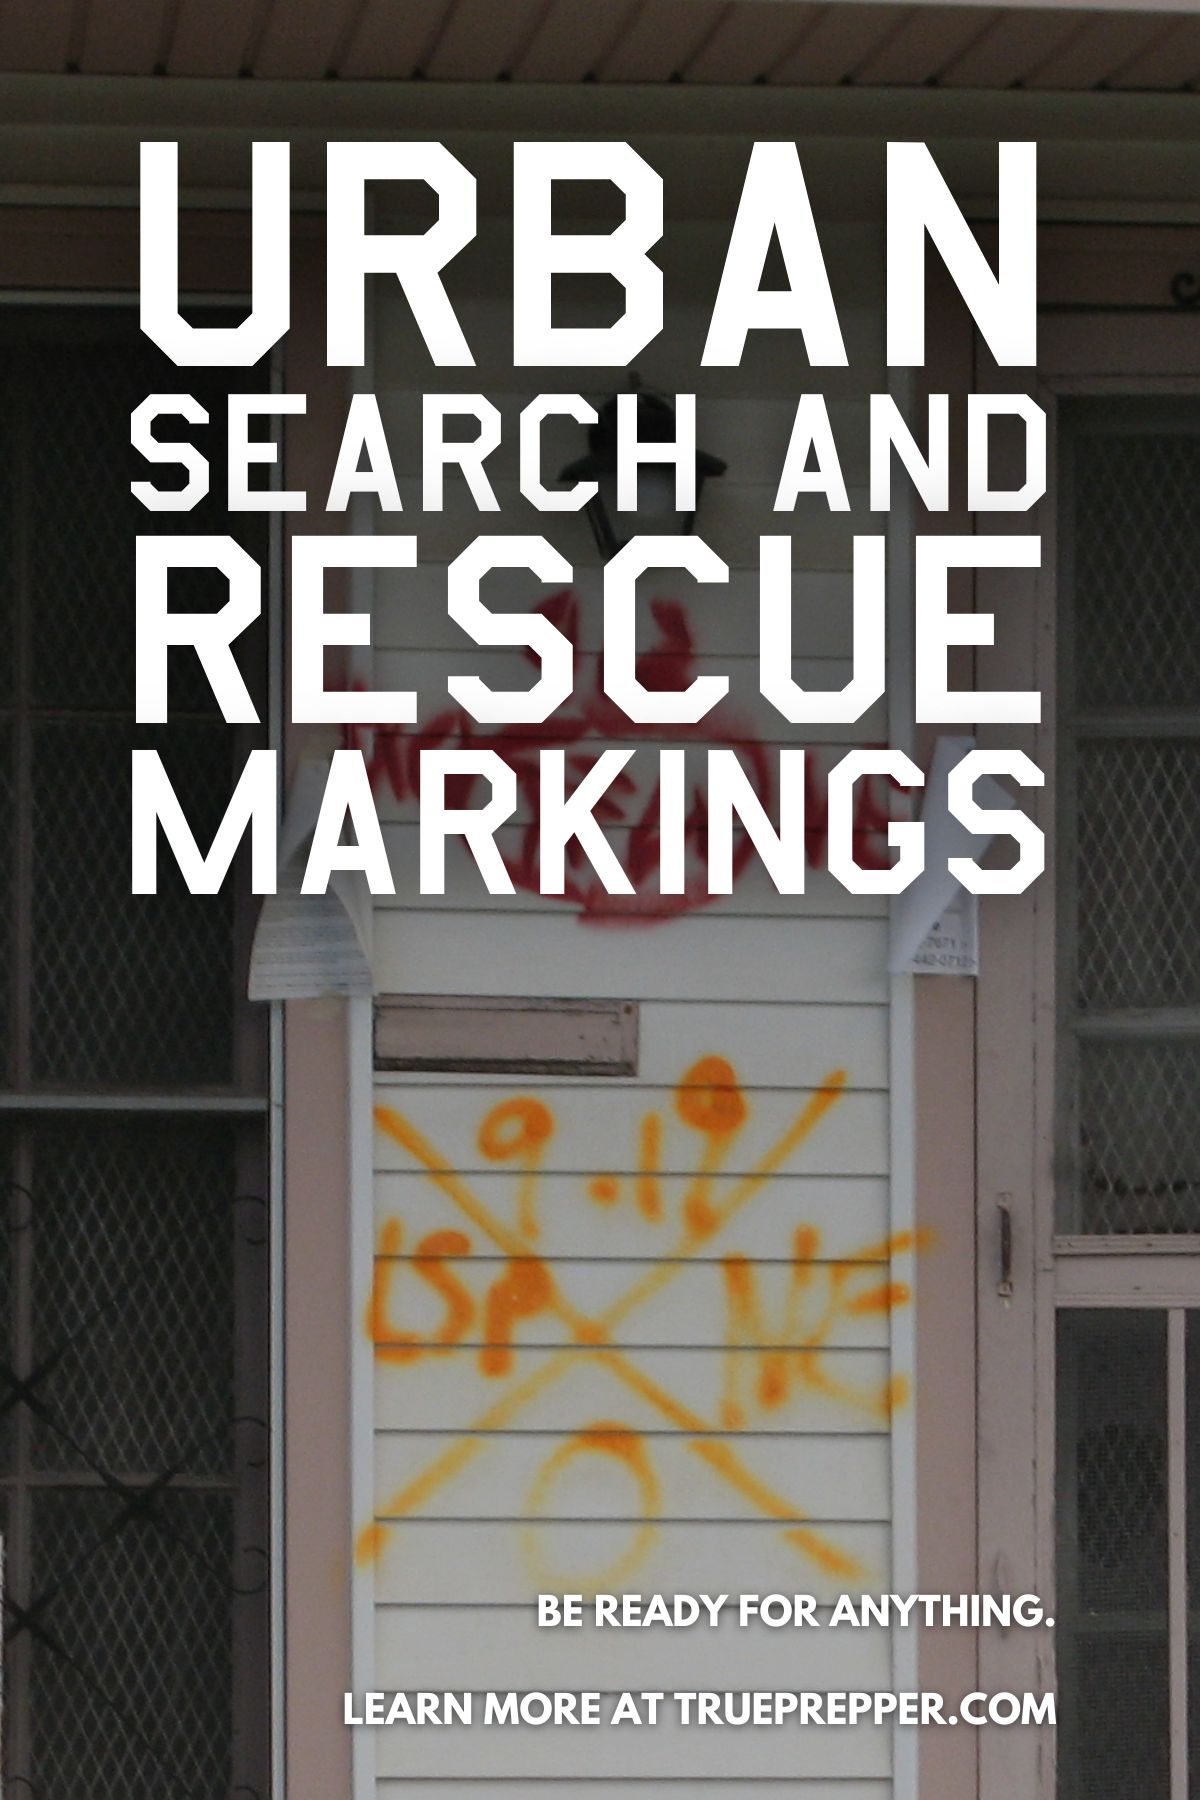 Urban Search and Rescue Markings